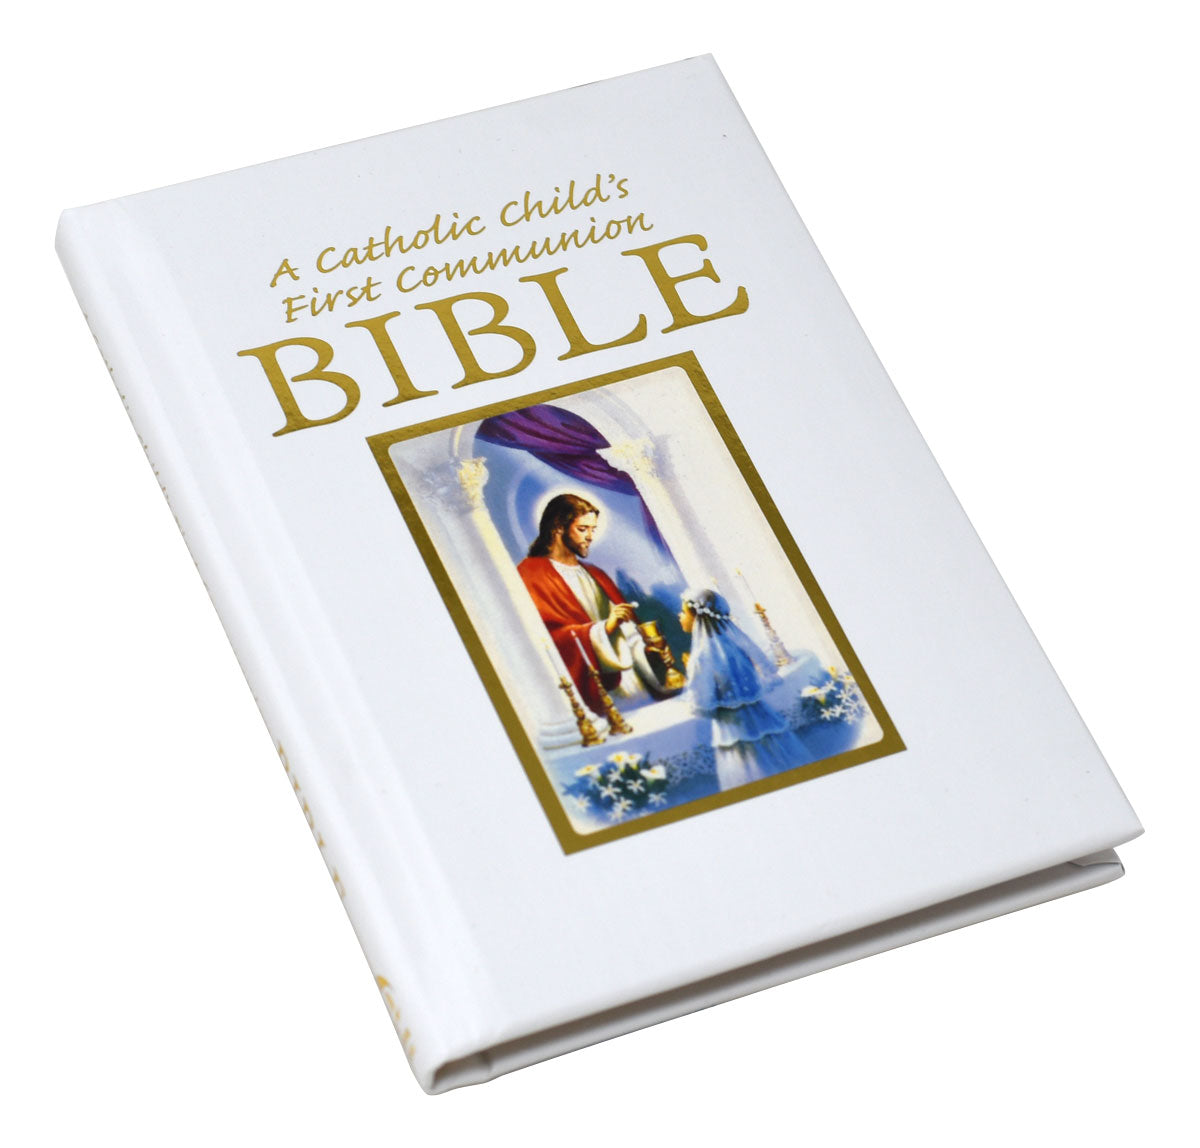 A Catholic Child's First Communion Bible-Traditions-Girl